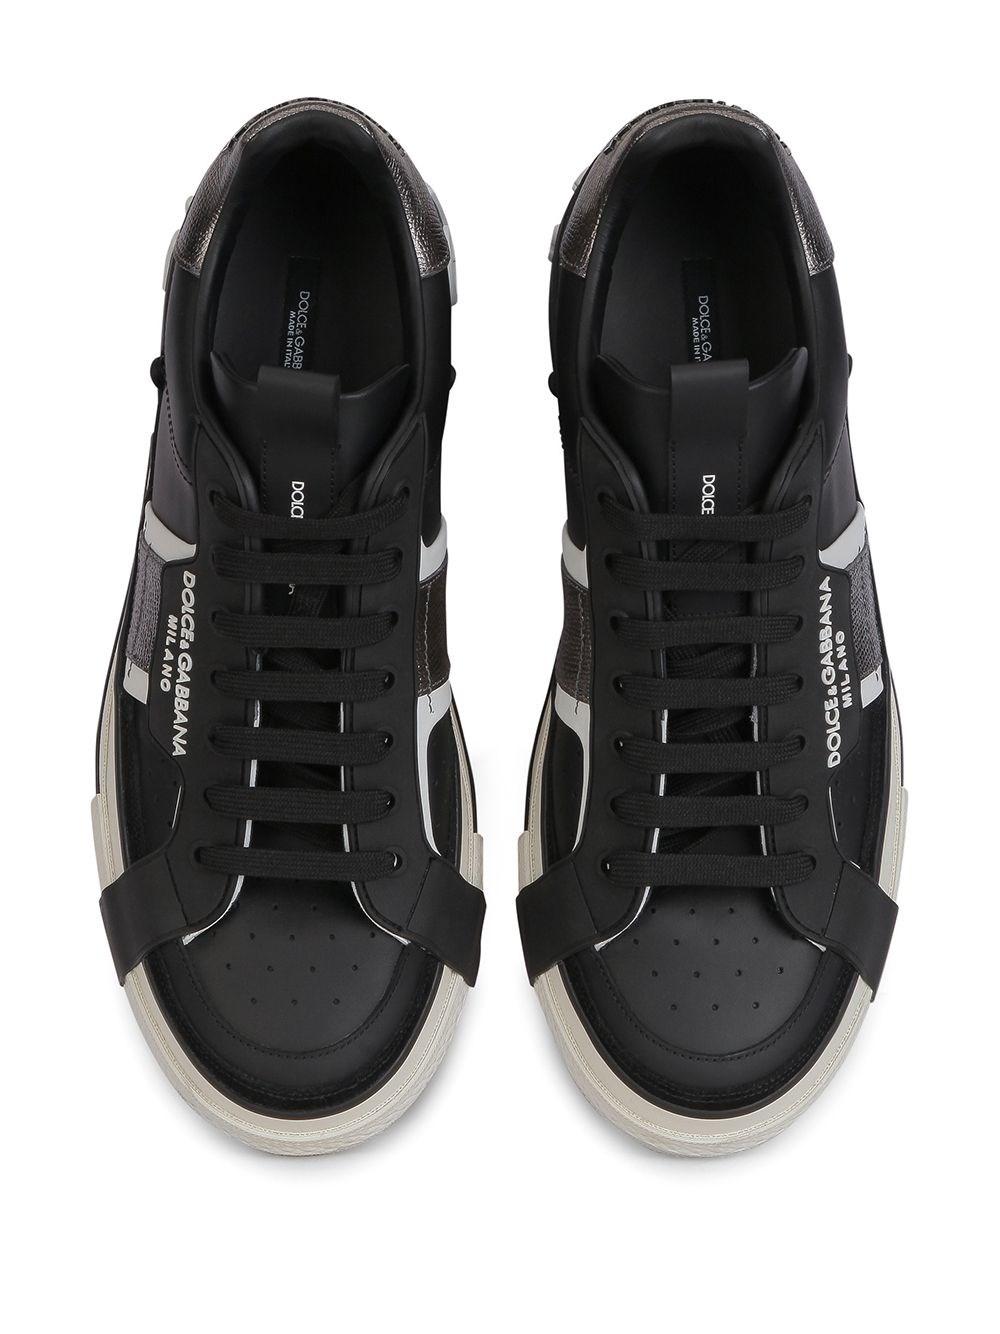 Dolce & Gabbana Leather Ns1 Low-top Sneakers in Black for Men 